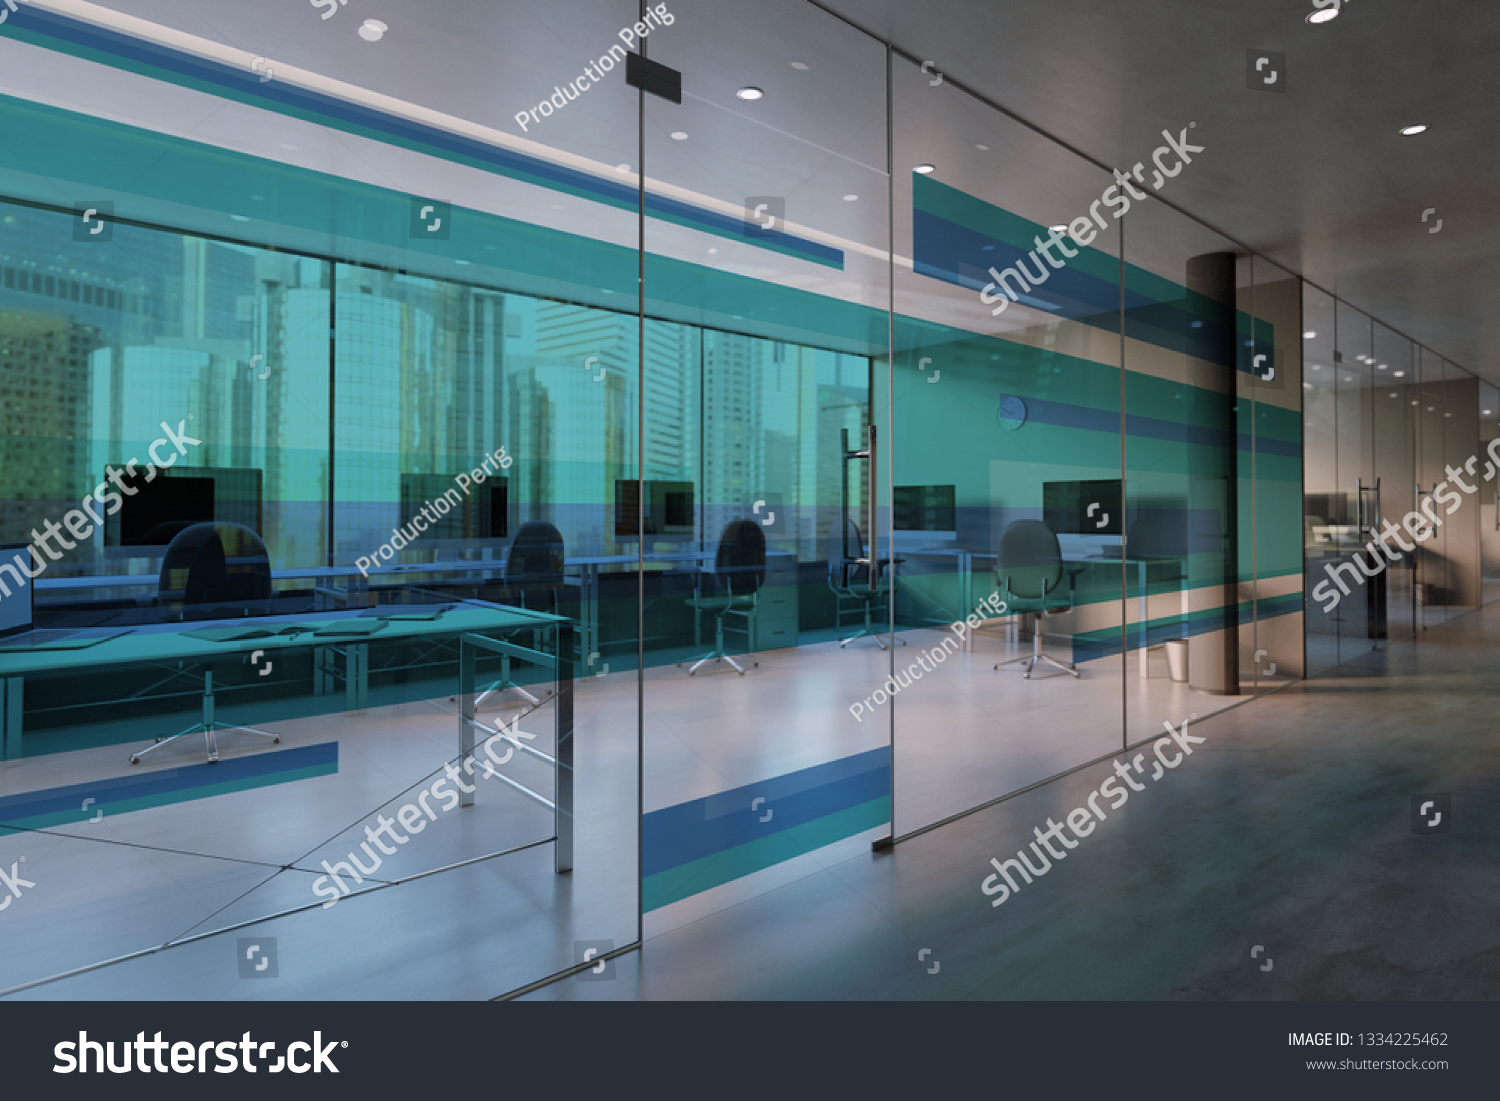 Download View Glass Office Room Wall Mockup Stock Illustration 1334225462